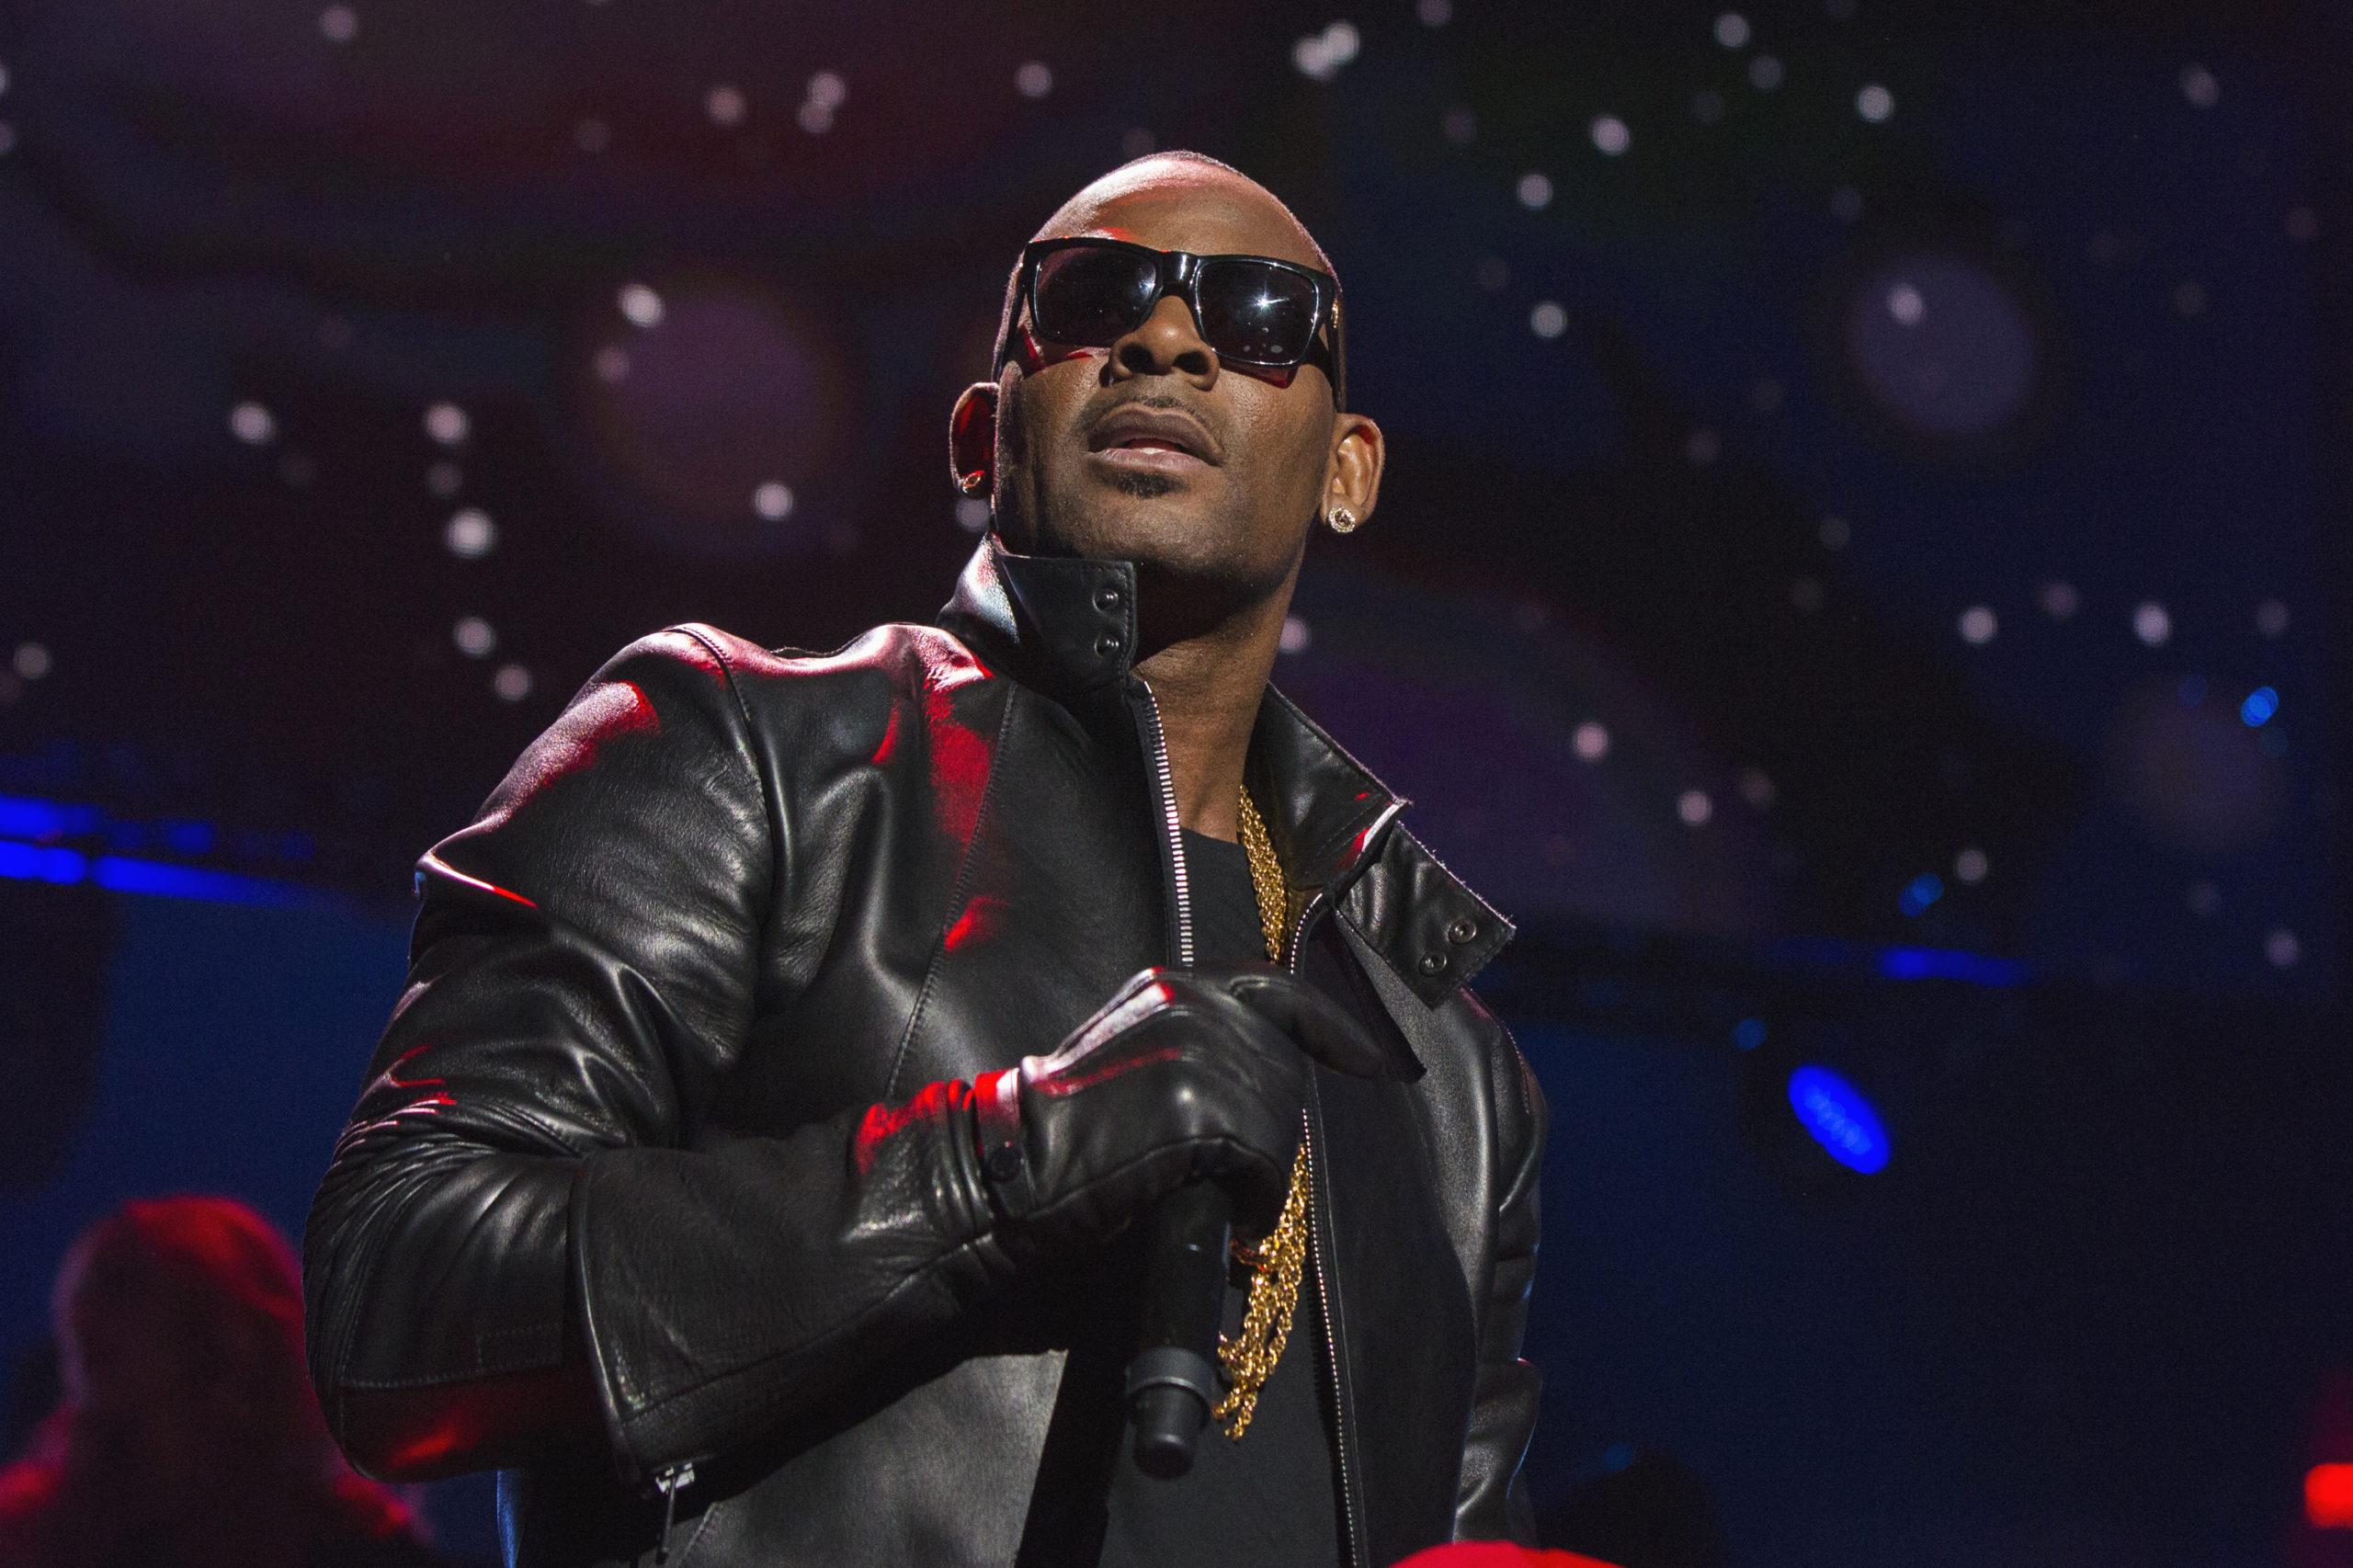 Singer R Kelly performs during the 2013 Z100 Jingle Ball in New York December 13, 2013. REUTERS/Lucas Jackson